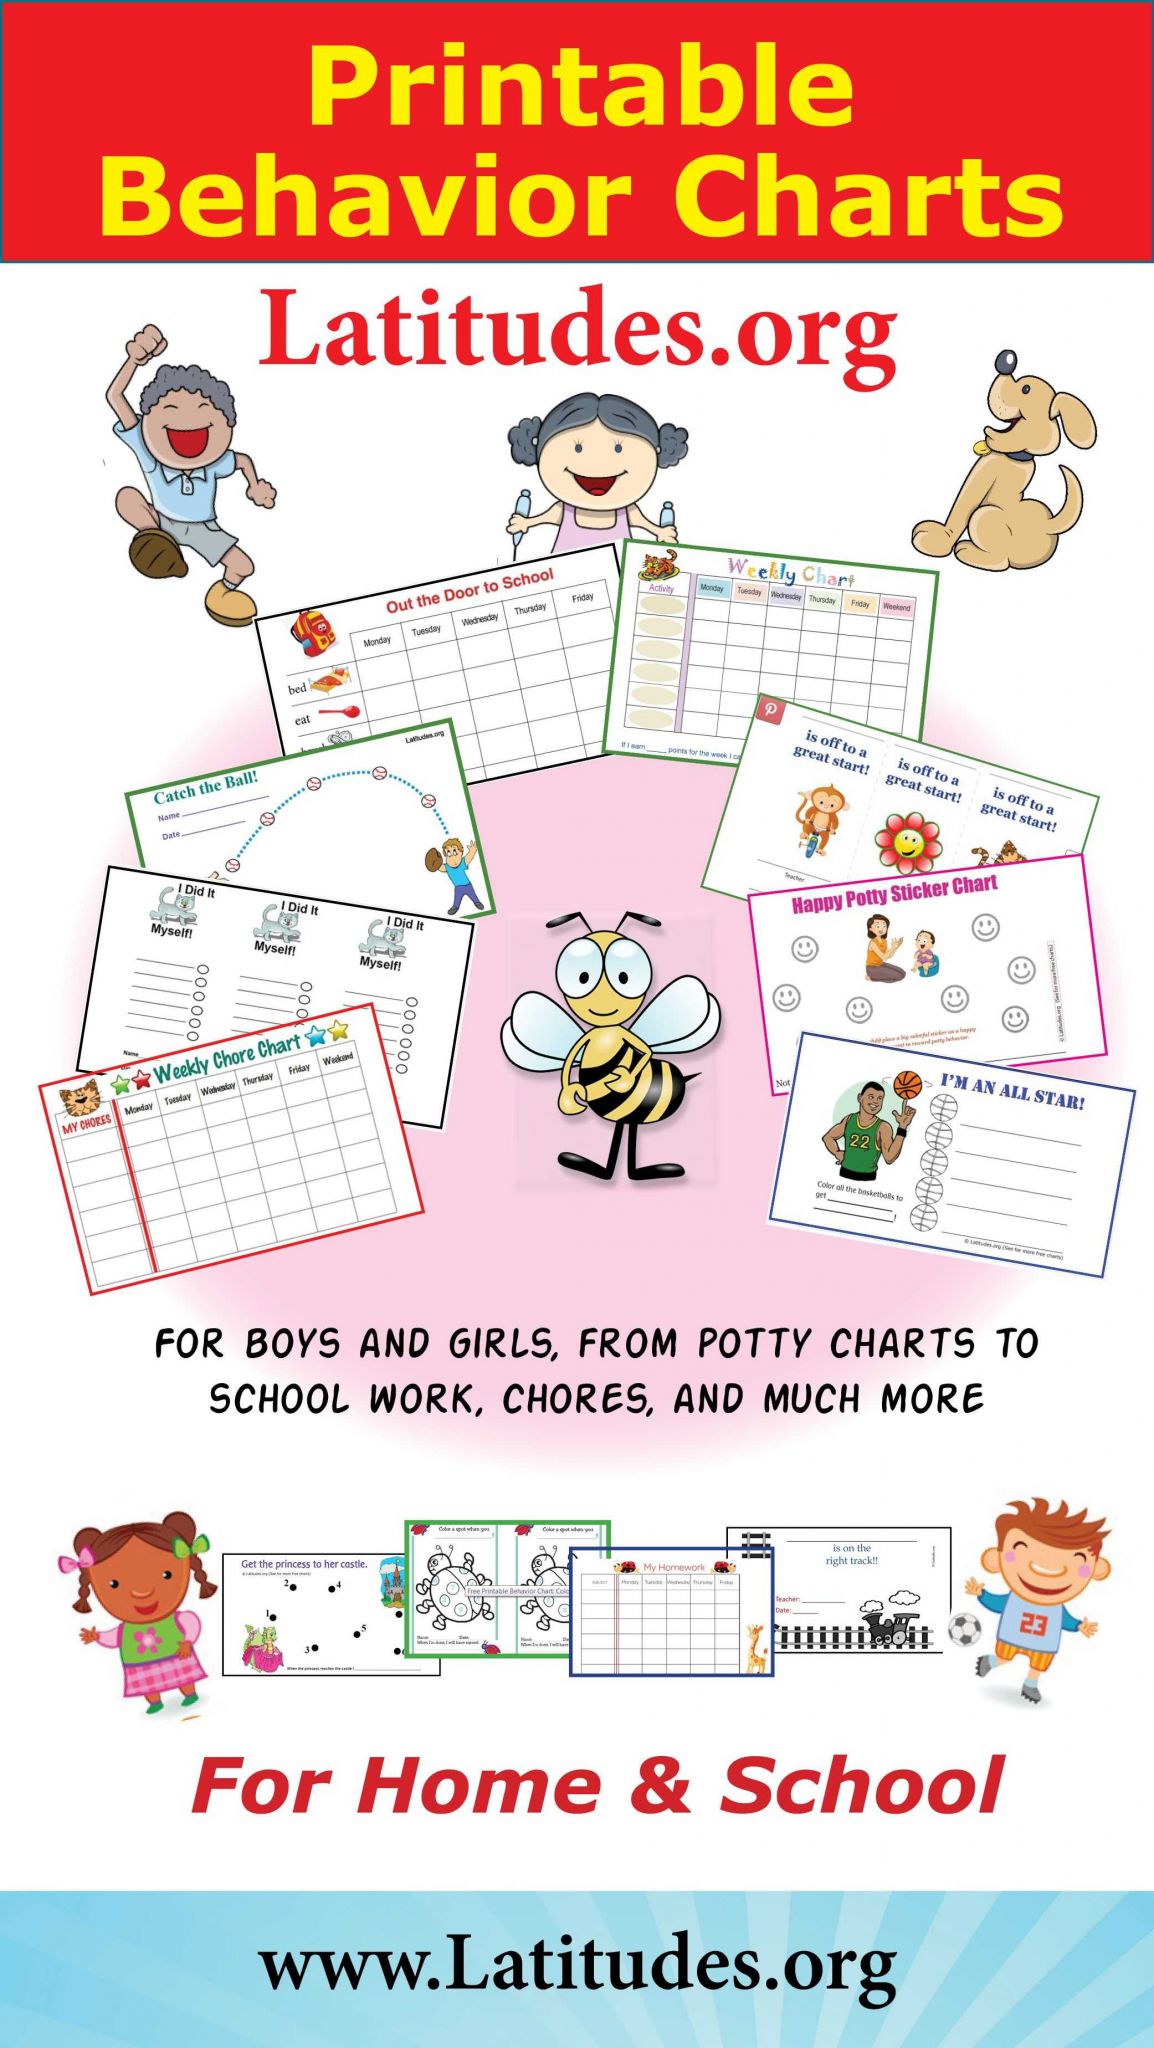 Sleep Hygiene Worksheet Also Free Printable Behavior Charts for Home and School